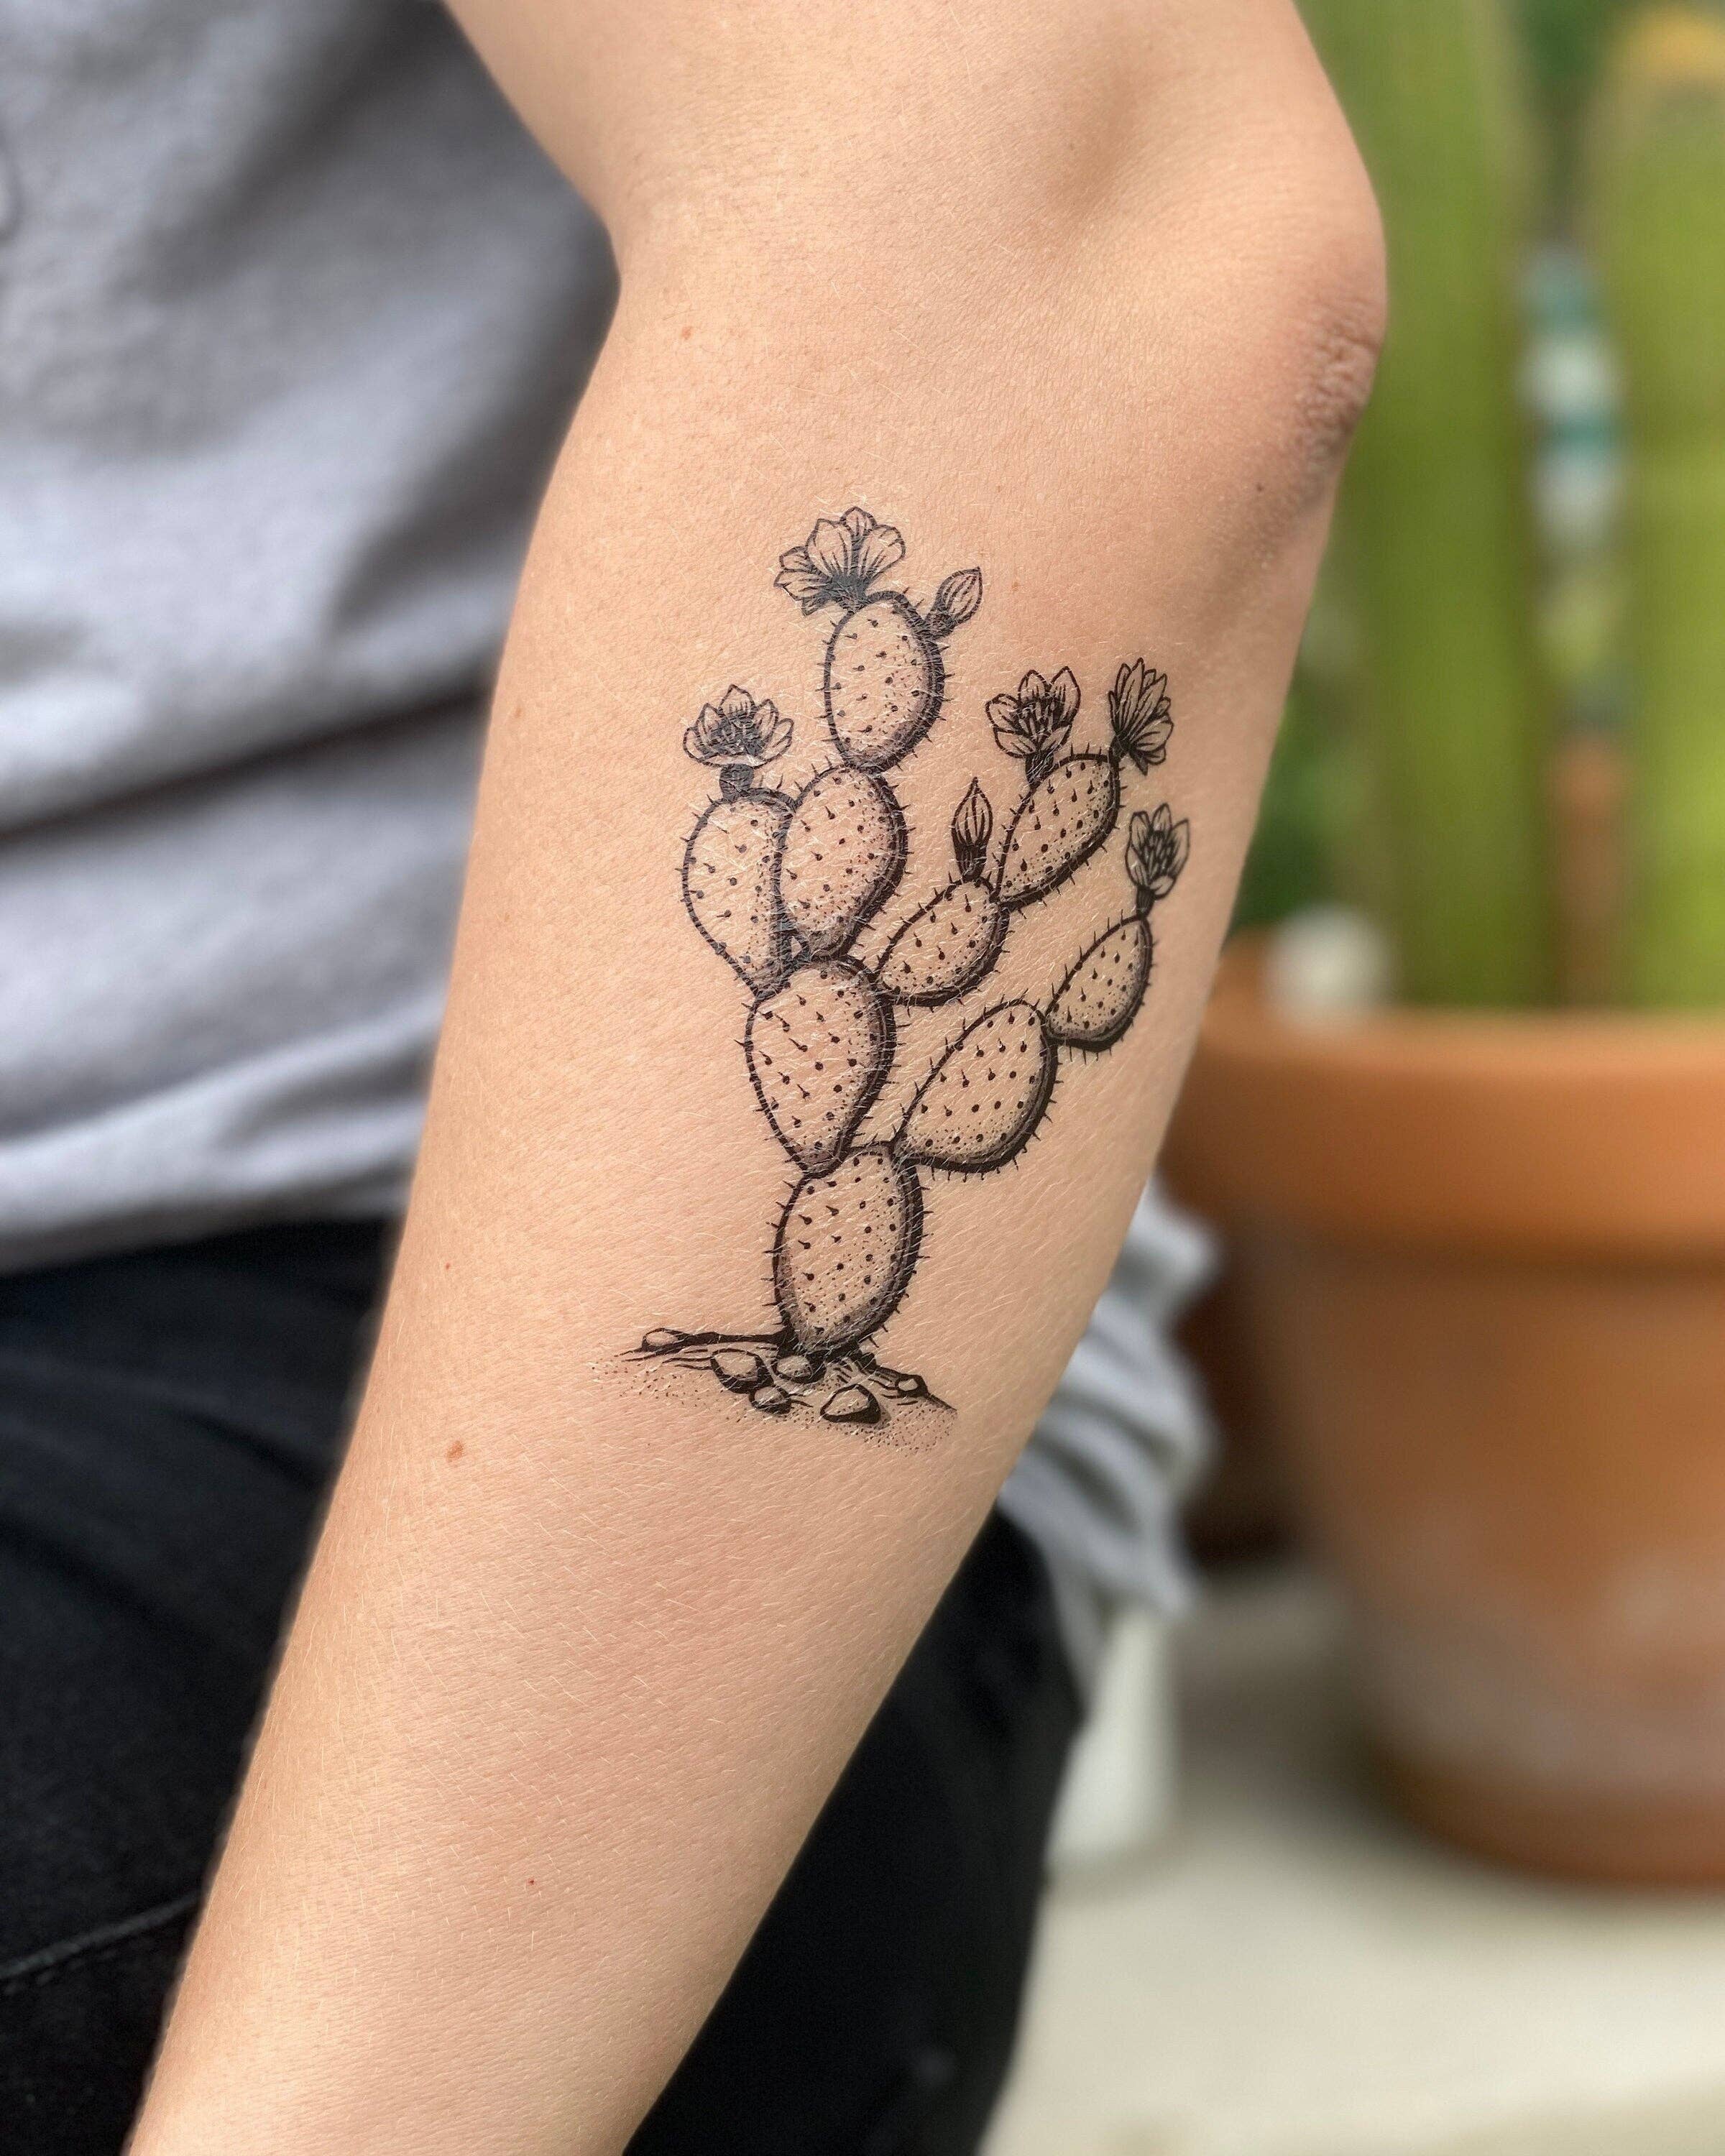 Brujita Loca Tattoos - El Nopal 🌵 from my Lotería Special✨ Thank you Andy!  You are a gem :). To book email: brujitalocatattoos@gmail.com or DM. . . .  . . . . #